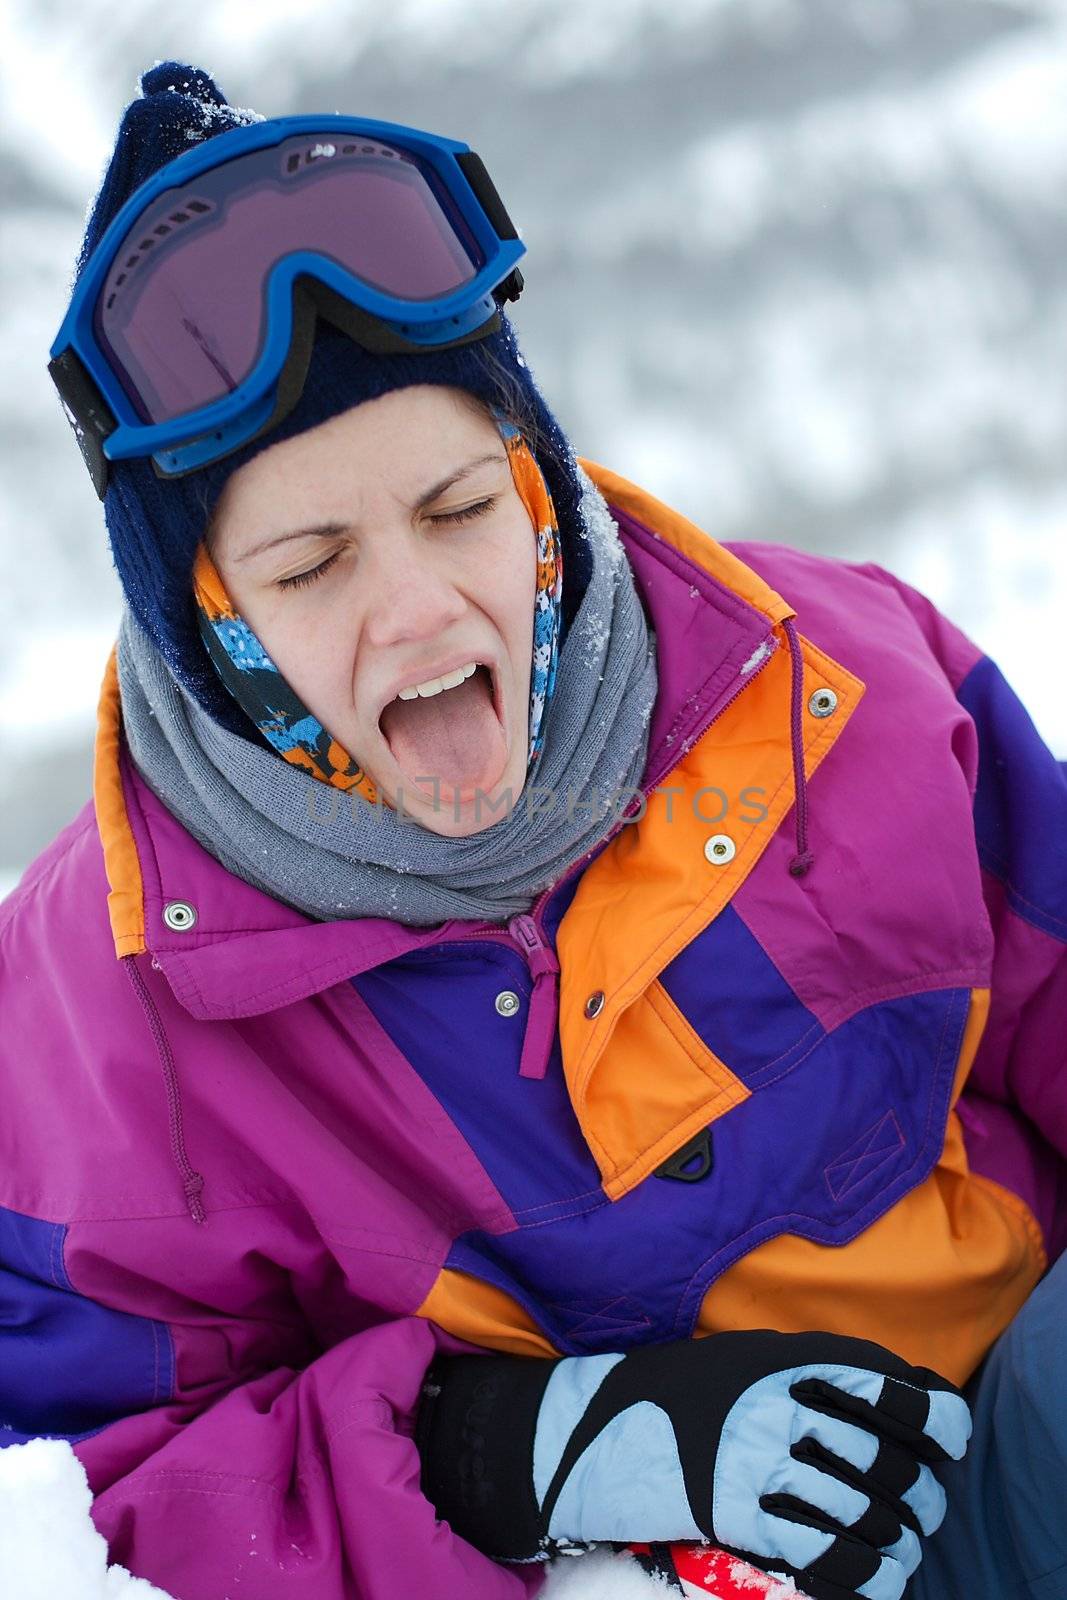 Female skier sticking out tongue